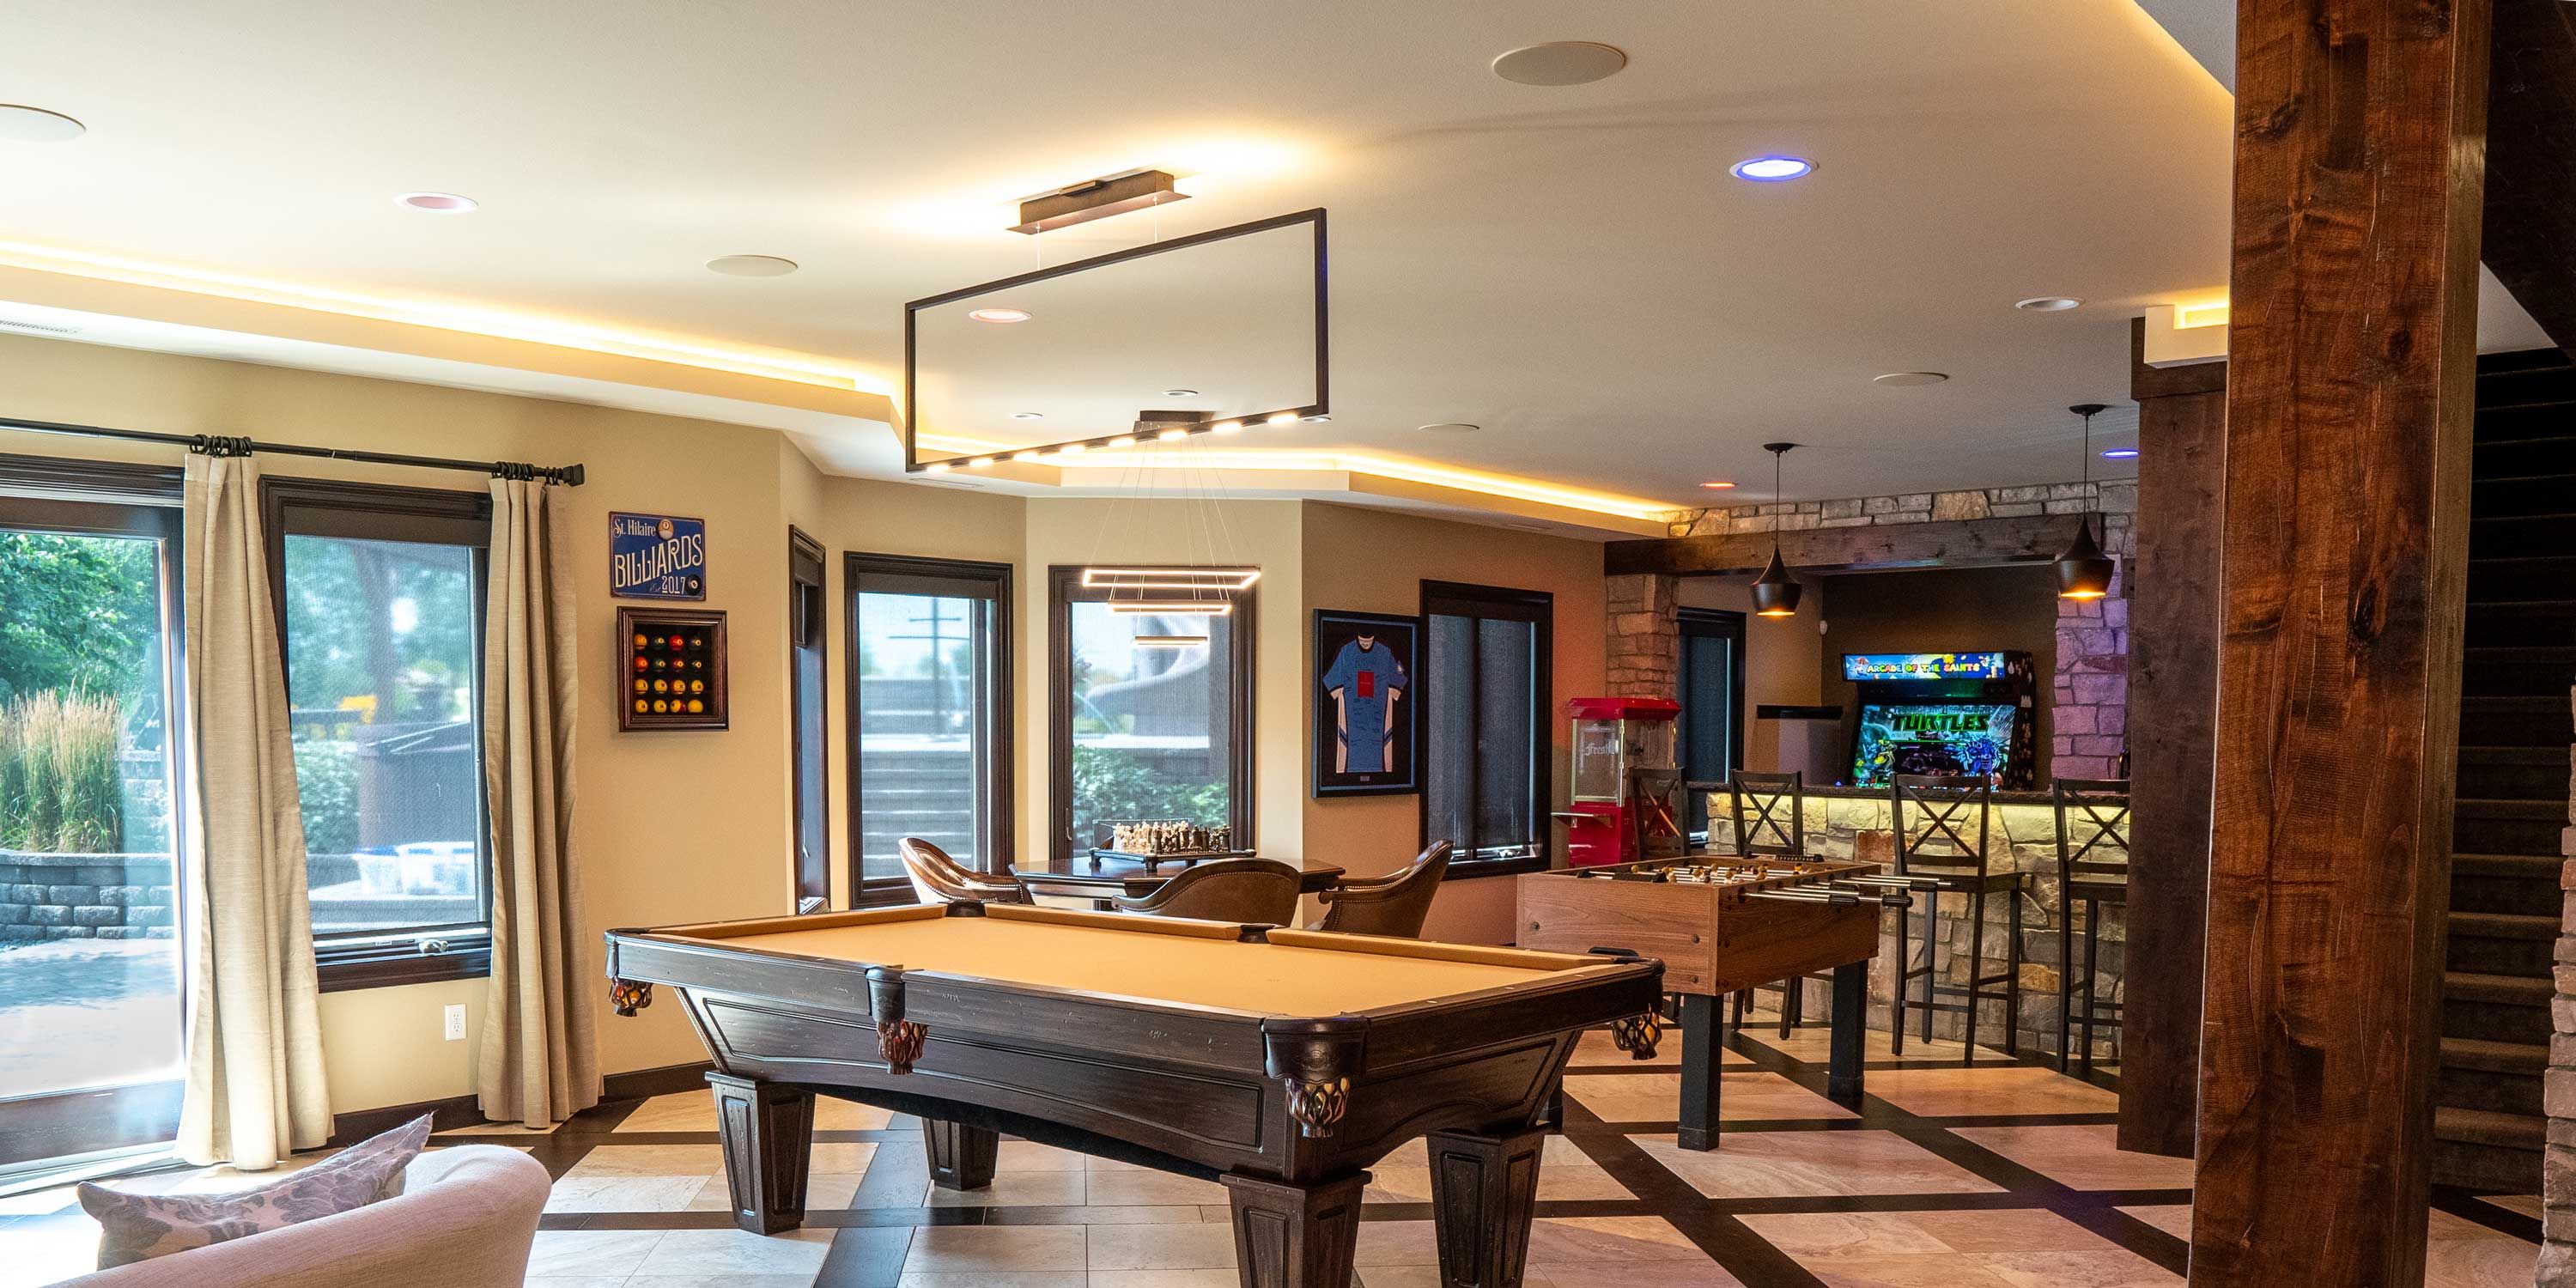 bar and game room with a large projector screen from sony and a wine bar